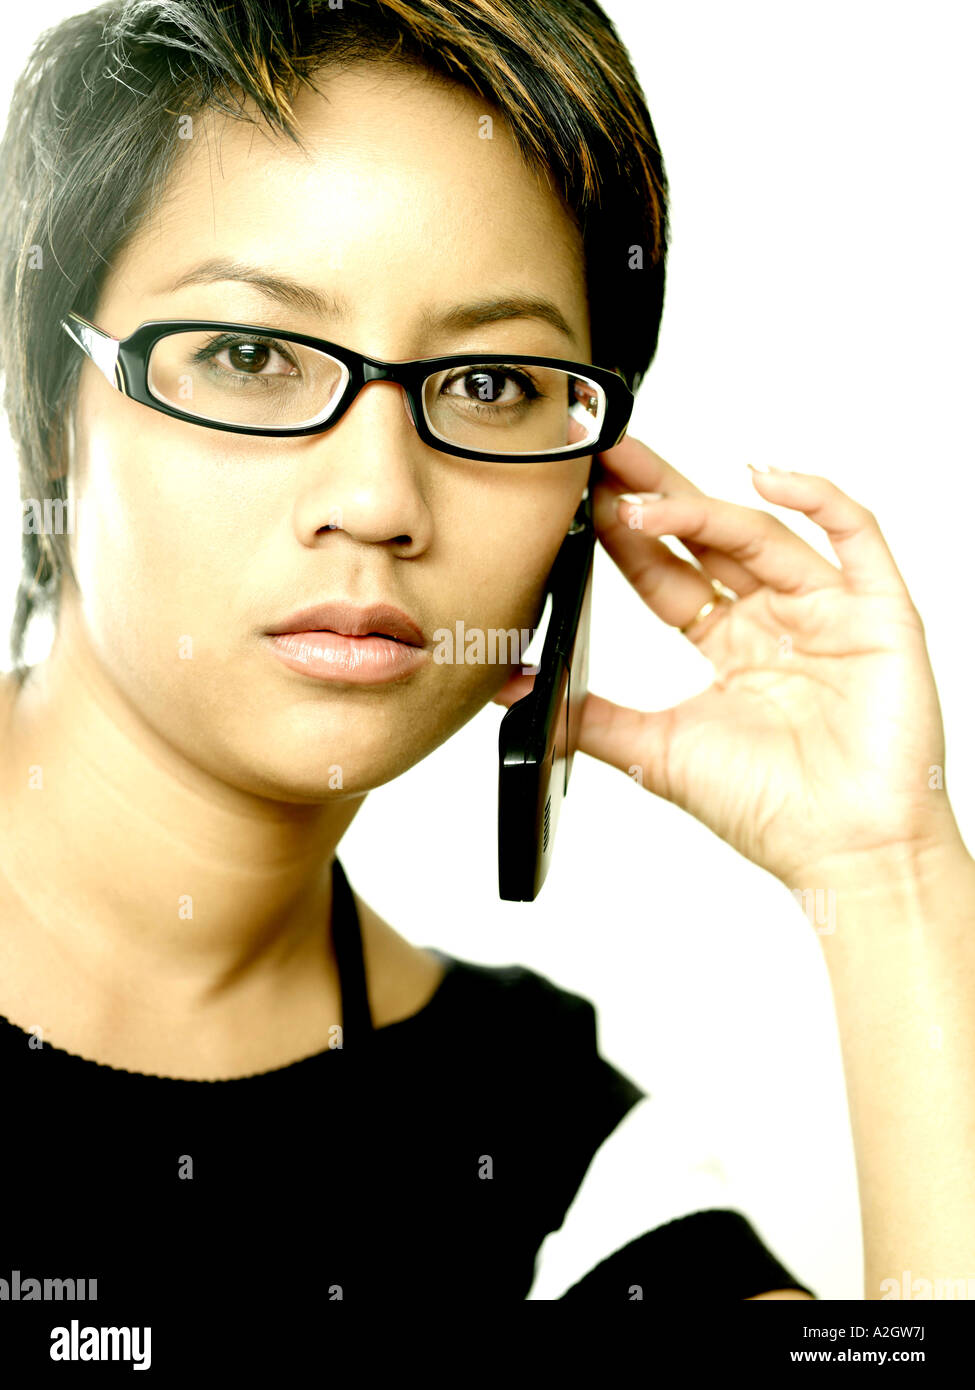 Young AsianWoman Wearing Glasses Model Released Stock Photo